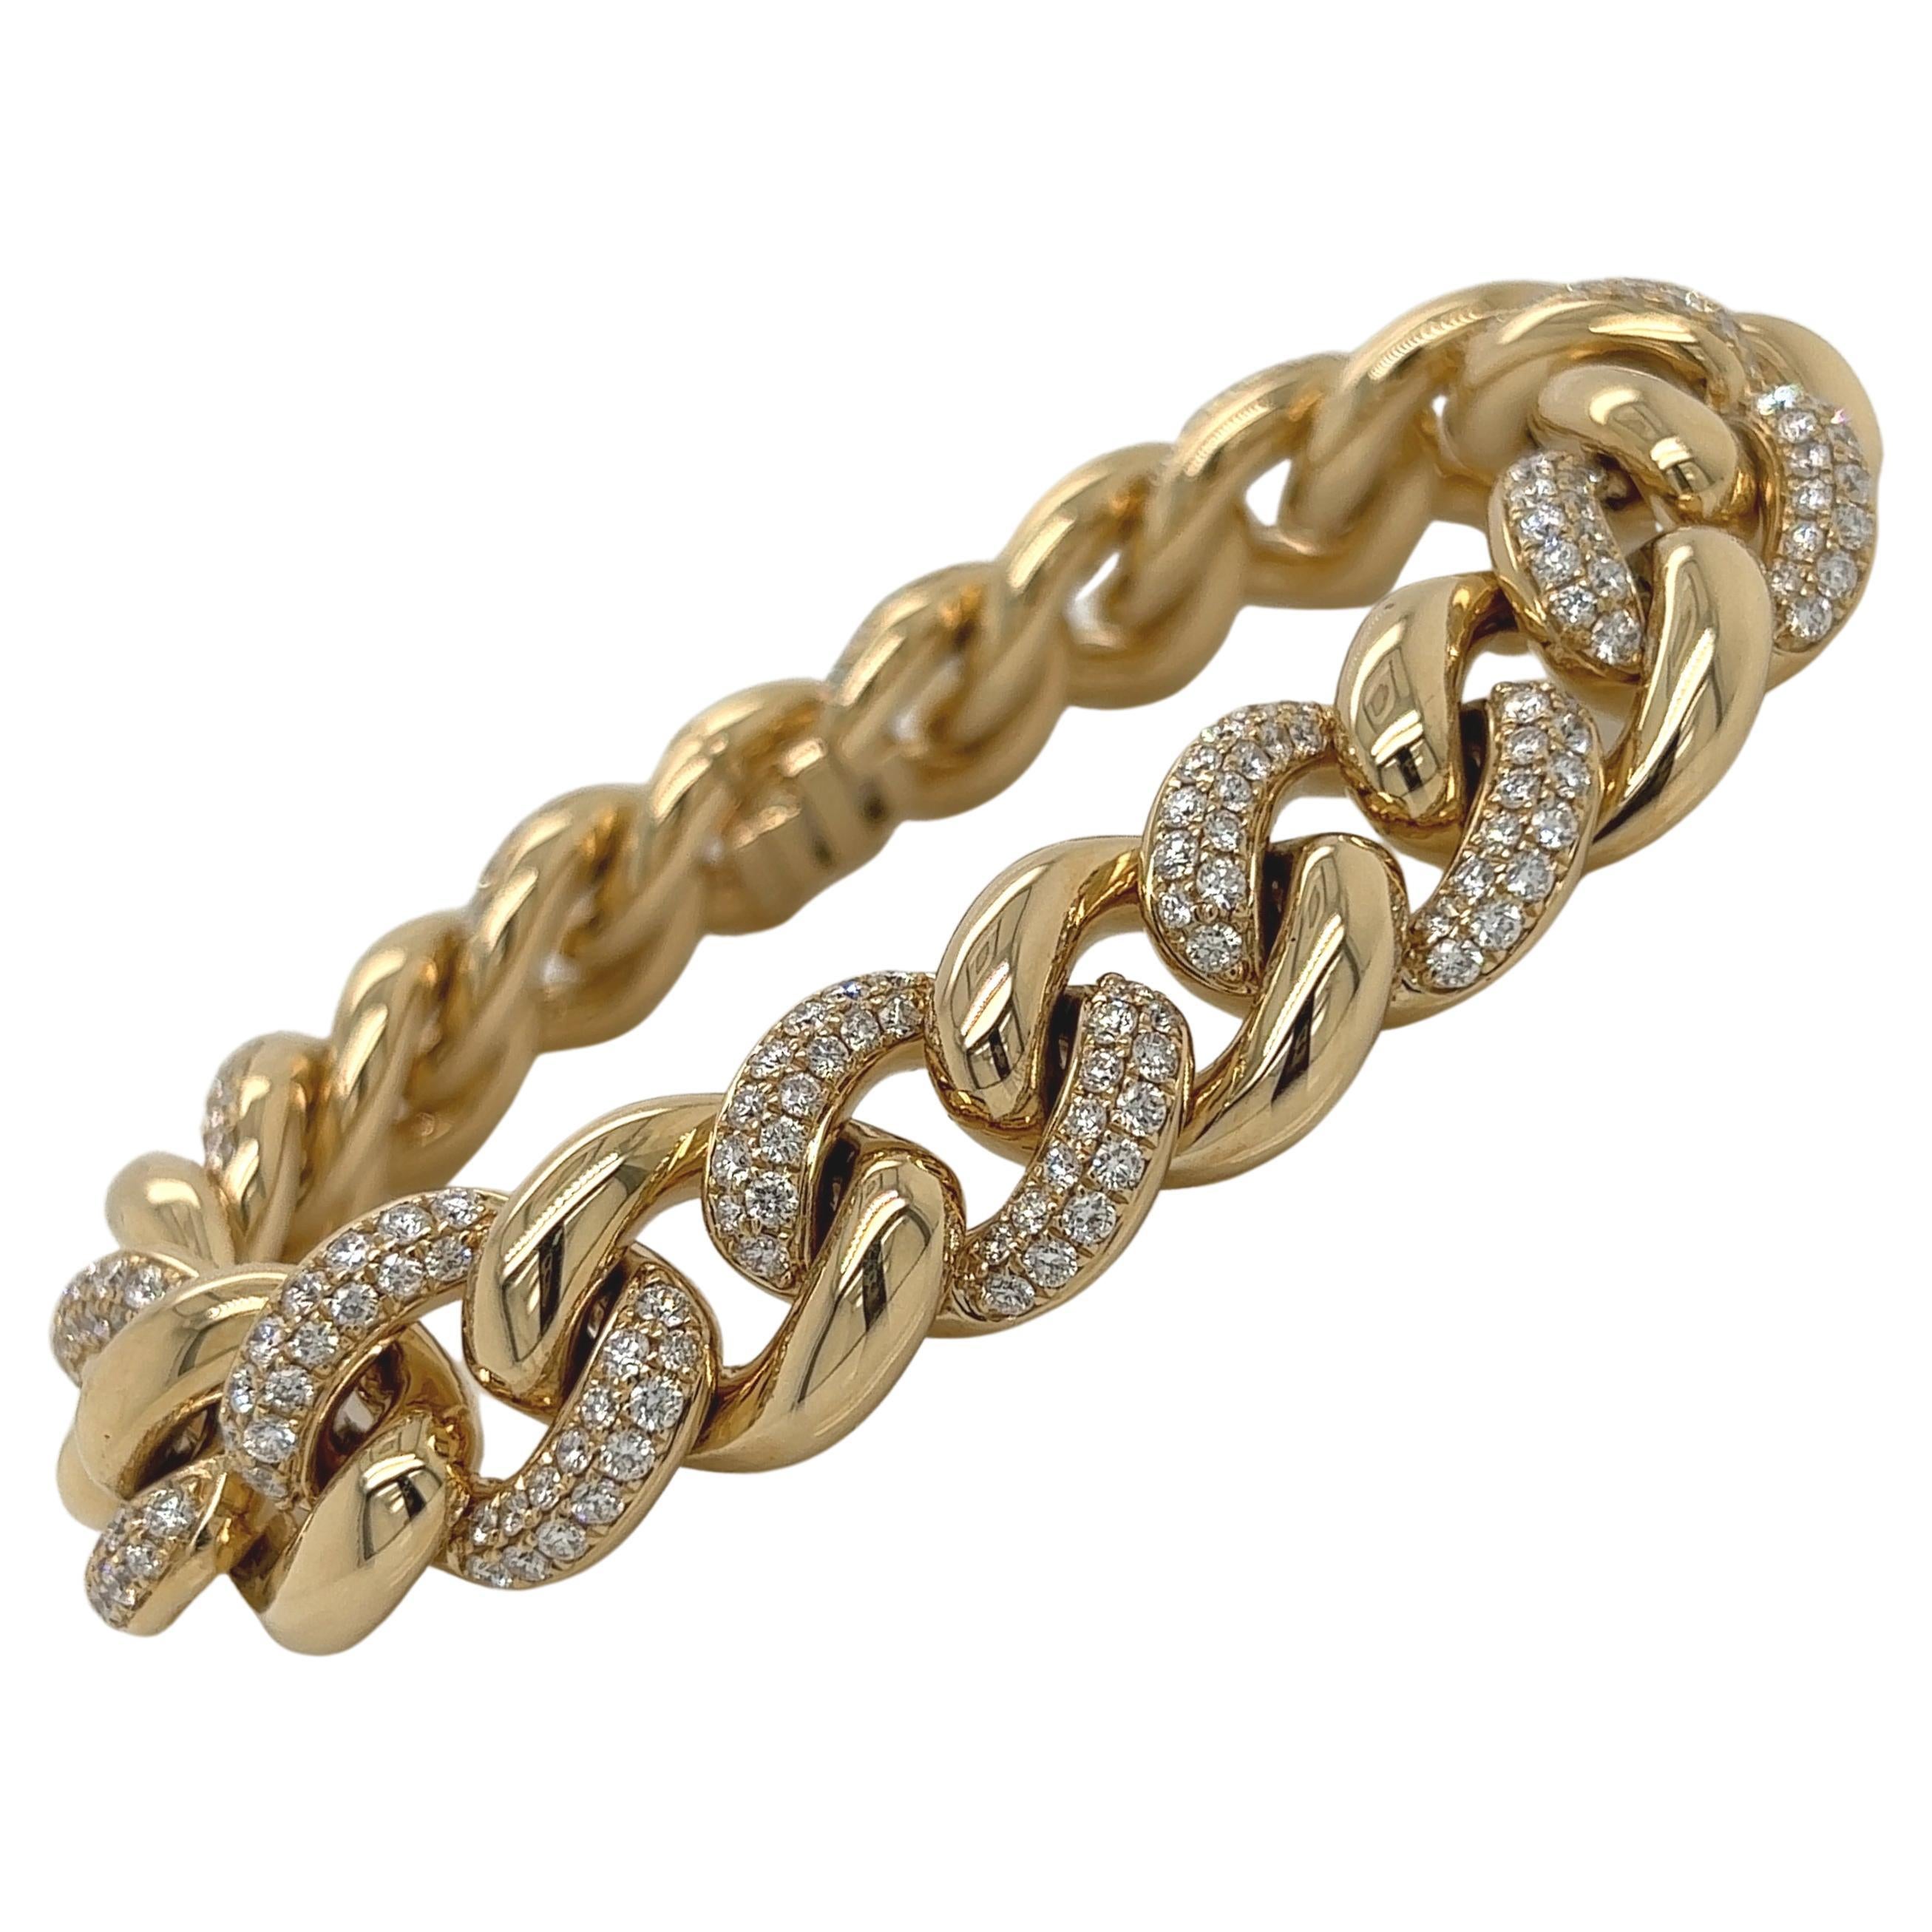 5.21 Carat 14K Yellow Gold Iced Out Cuban Link Diamond Bracelet, 41.9g For Sale